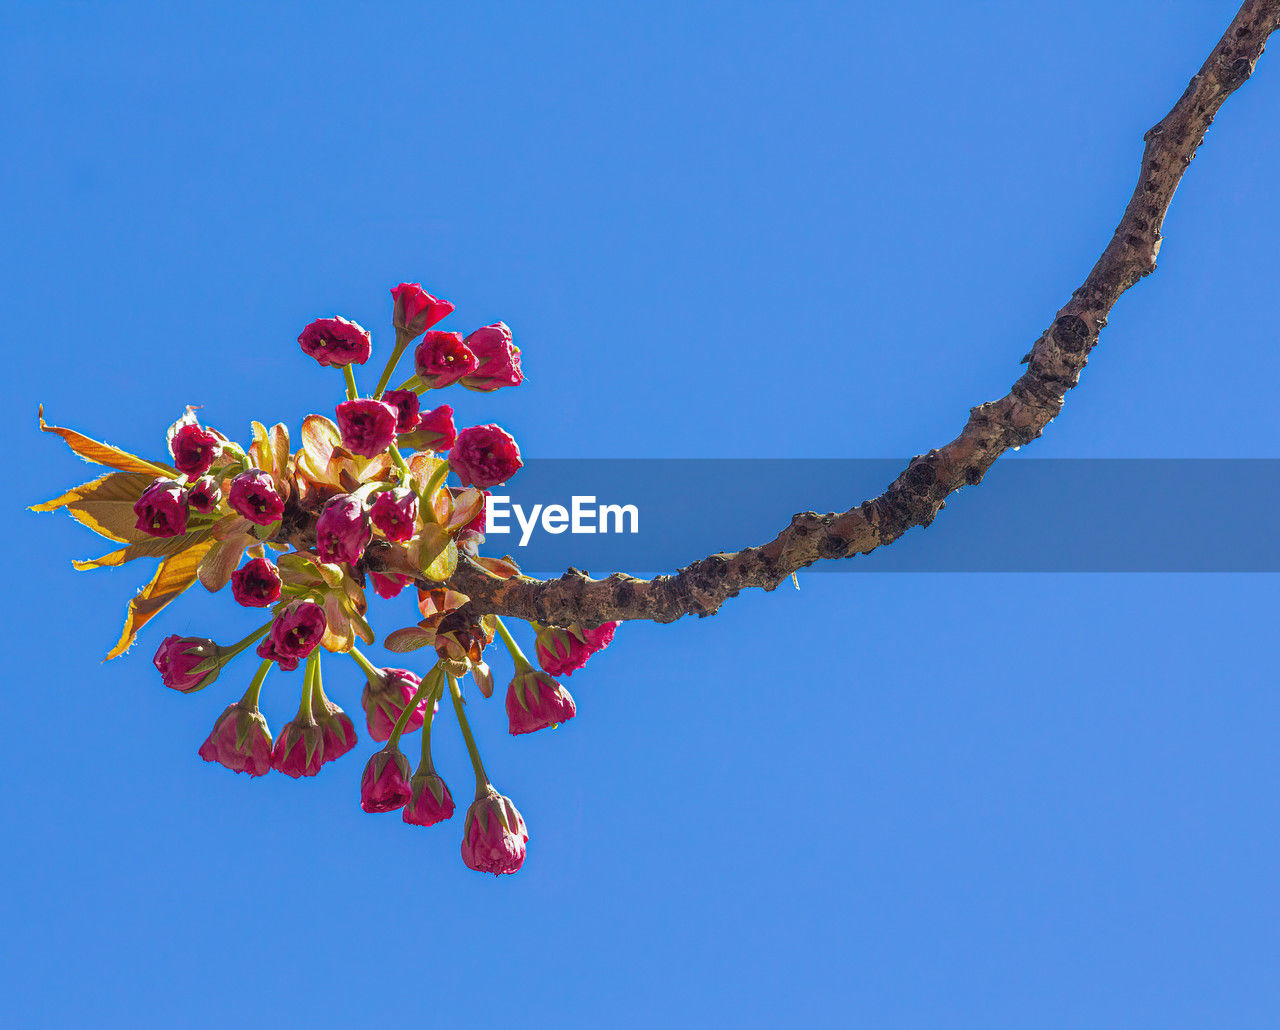 flower, sky, blue, nature, clear sky, branch, no people, outdoors, low angle view, sunny, plant, tree, red, day, celebration, tradition, leaf